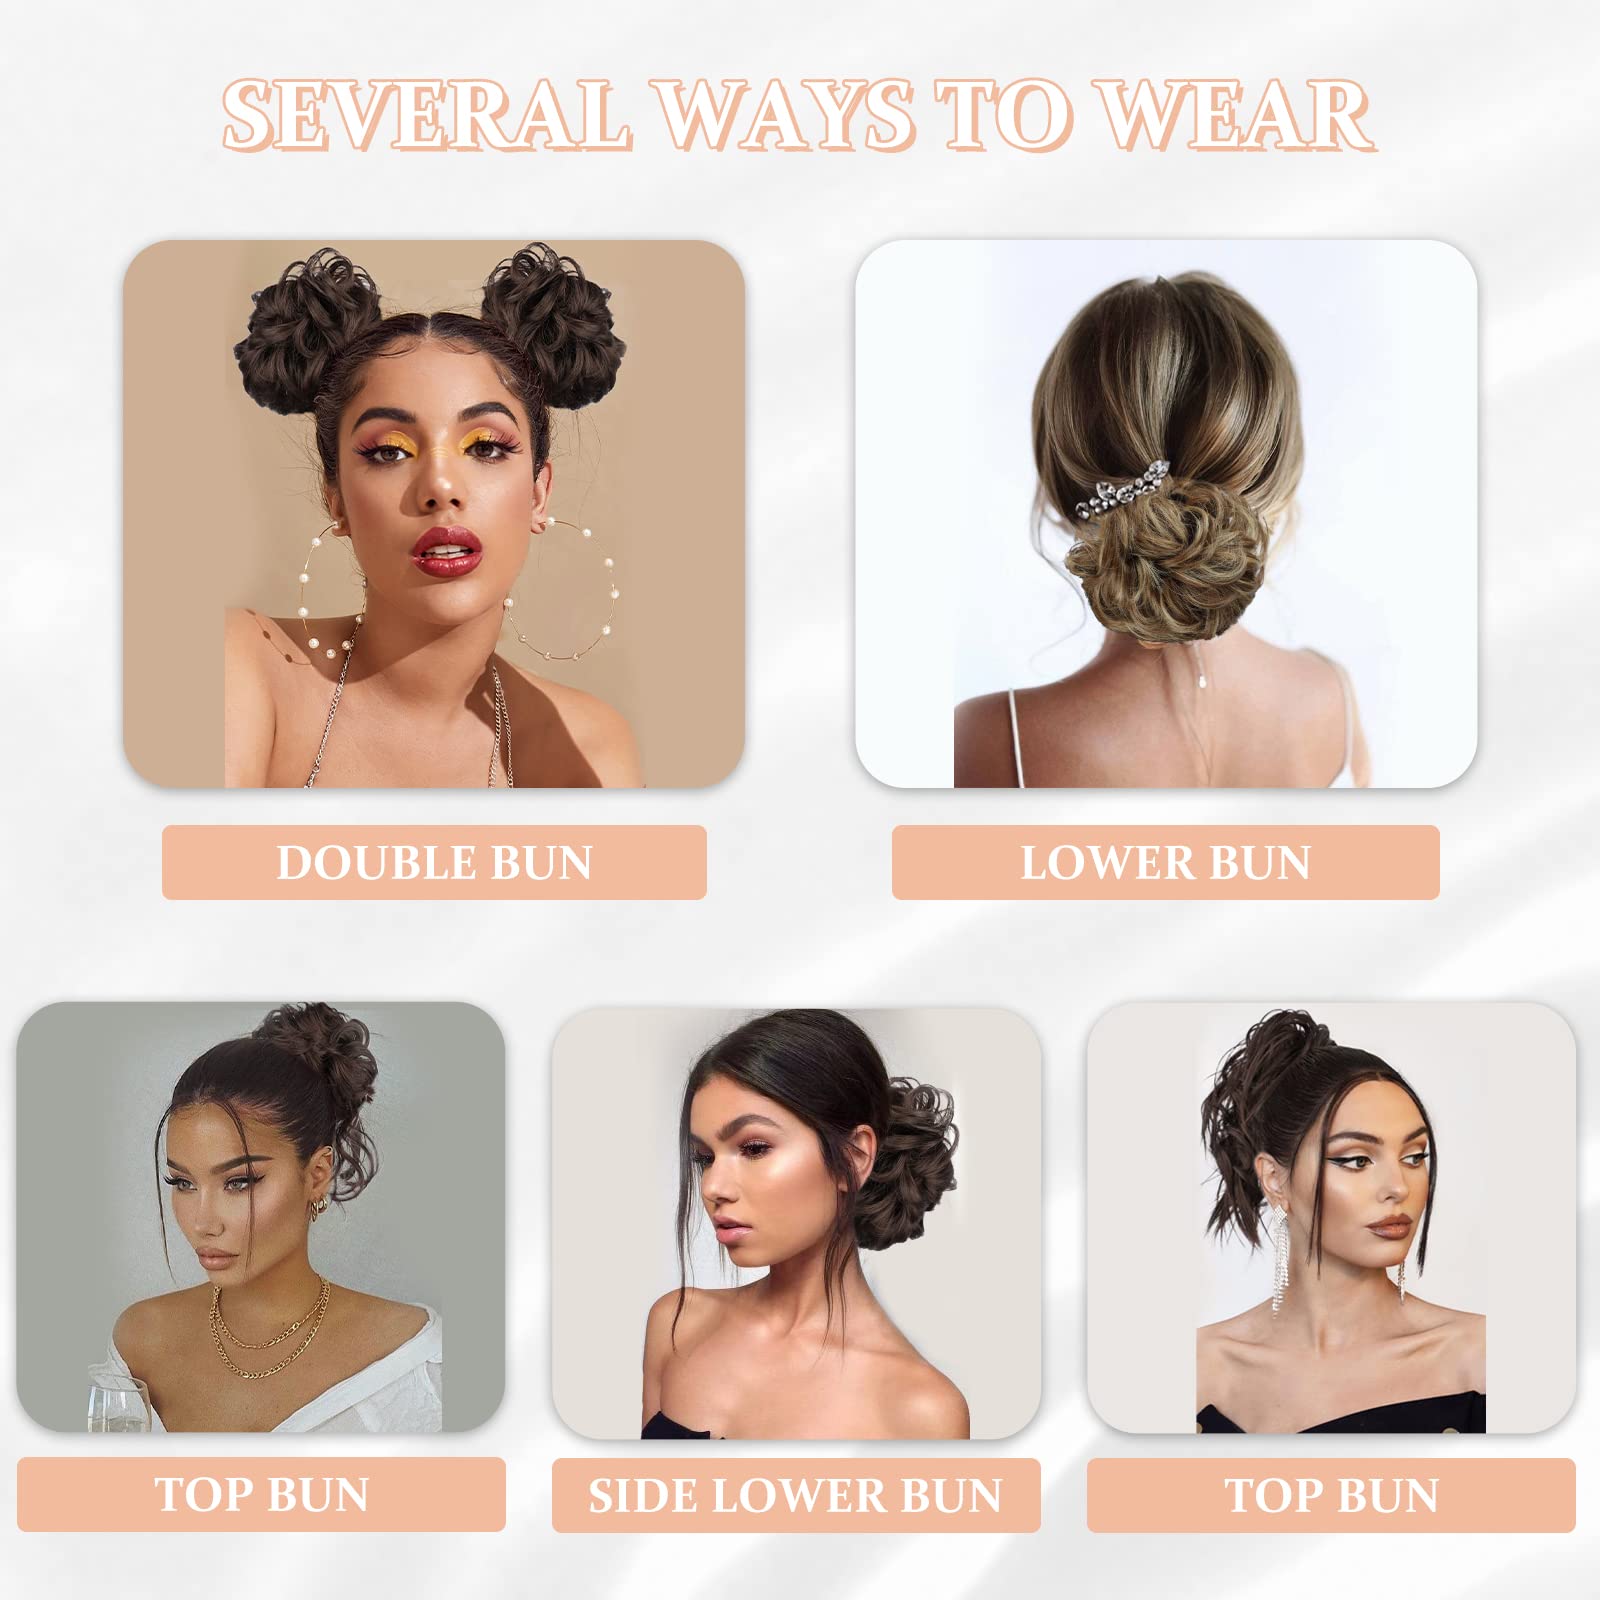 FnyPretty 5 PCS Messy Bun Hair Piece Hair Bun Hair pieces for women Tousled Updo Messy Curly Hair Pieces Hair Extensions Ponytail Elastic Easy Scrunchies Hairpiece(6A# Dark Brown)